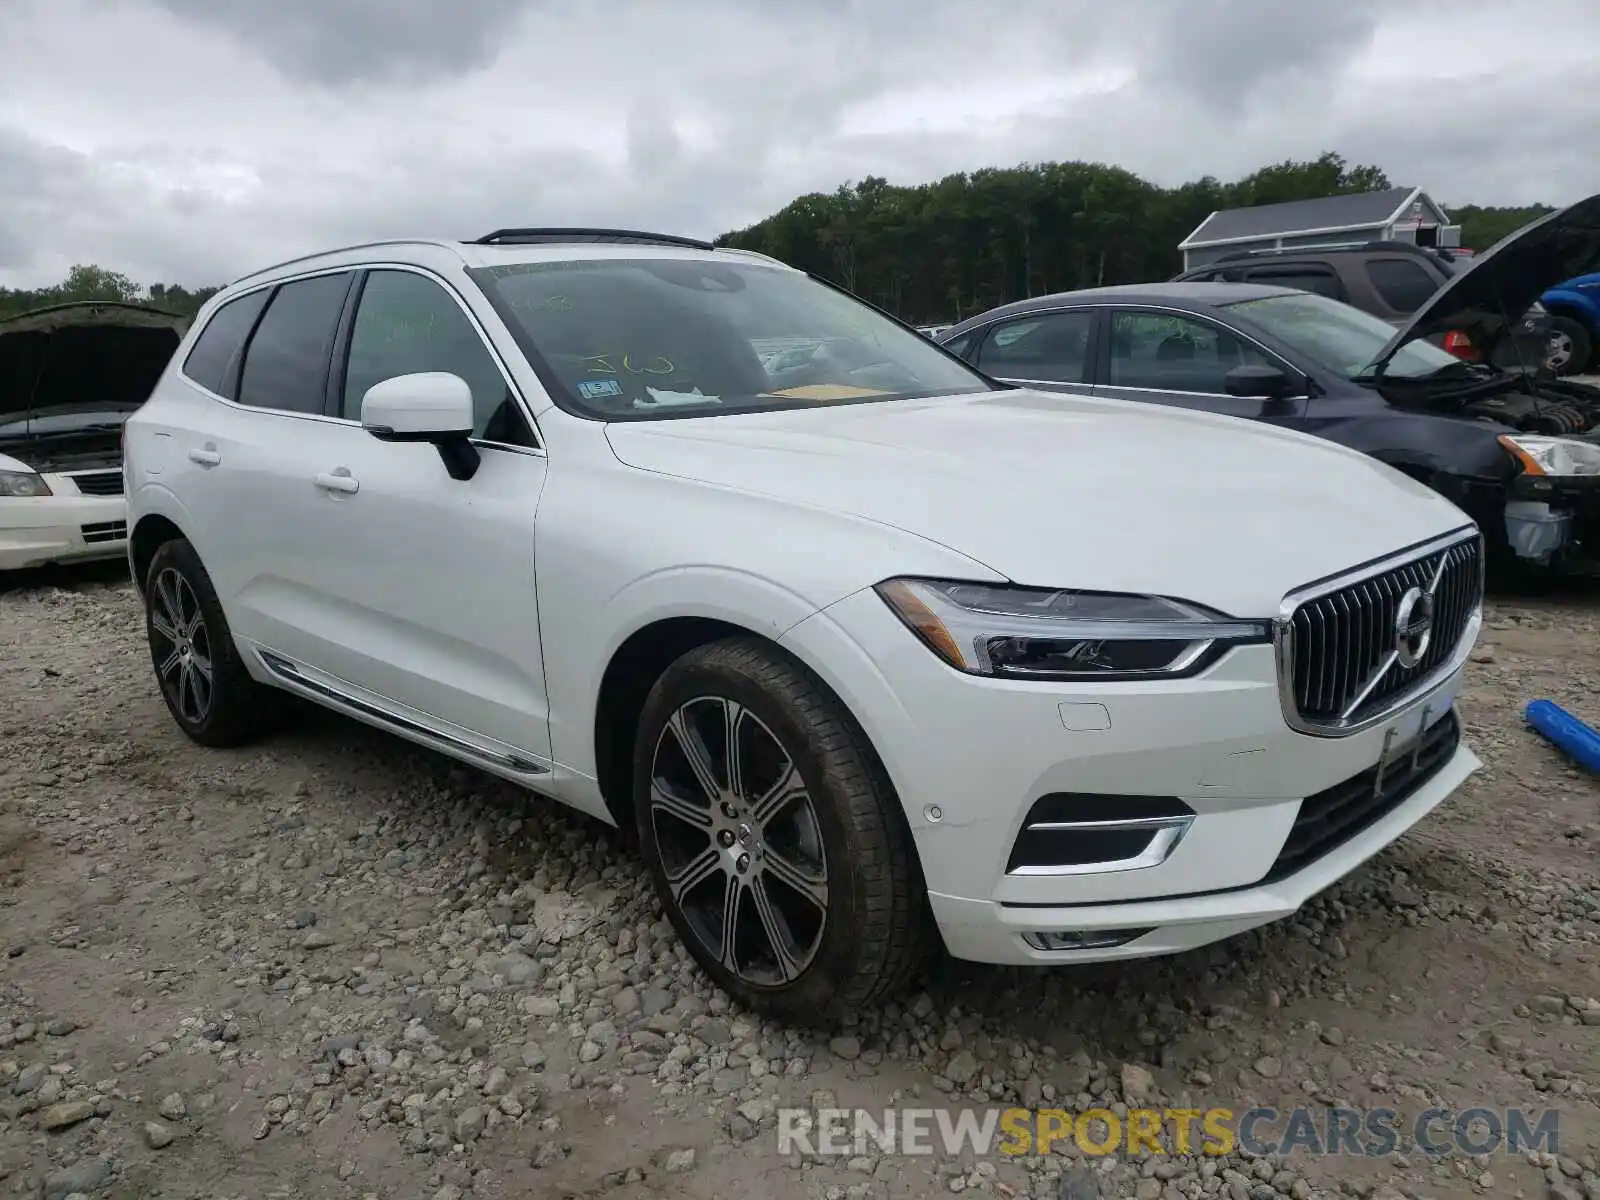 1 Photograph of a damaged car LYVA22RLXKB227757 VOLVO XC60 T6 IN 2019